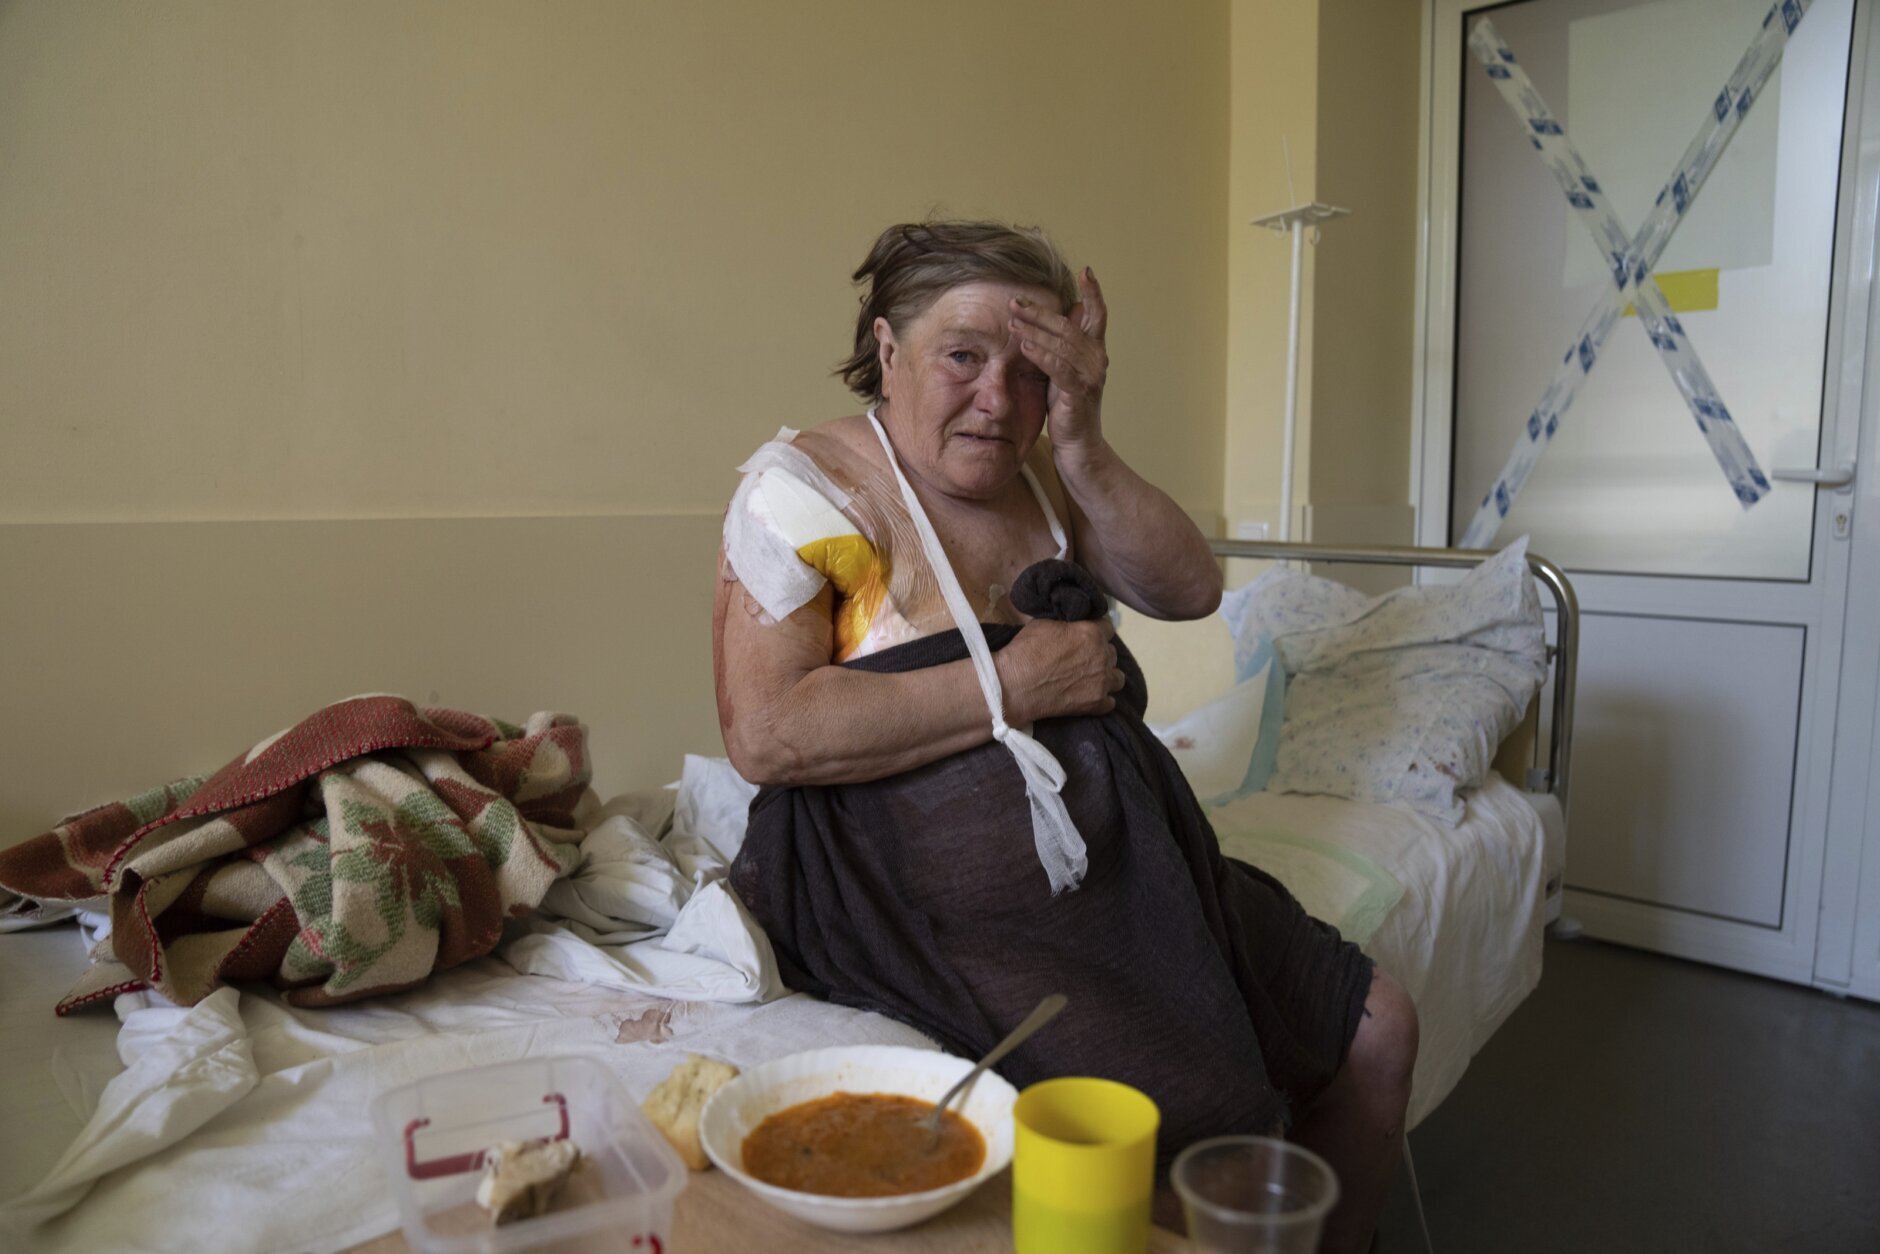 Tamara Oliynyk, 62, sits on a bed after surgery after being injured by shelling in Shandrigolovo village, at a hospital in Kramatorsk, eastern Ukraine, Tuesday, April 26, 2022. (AP Photo/Evgeniy Maloletka)